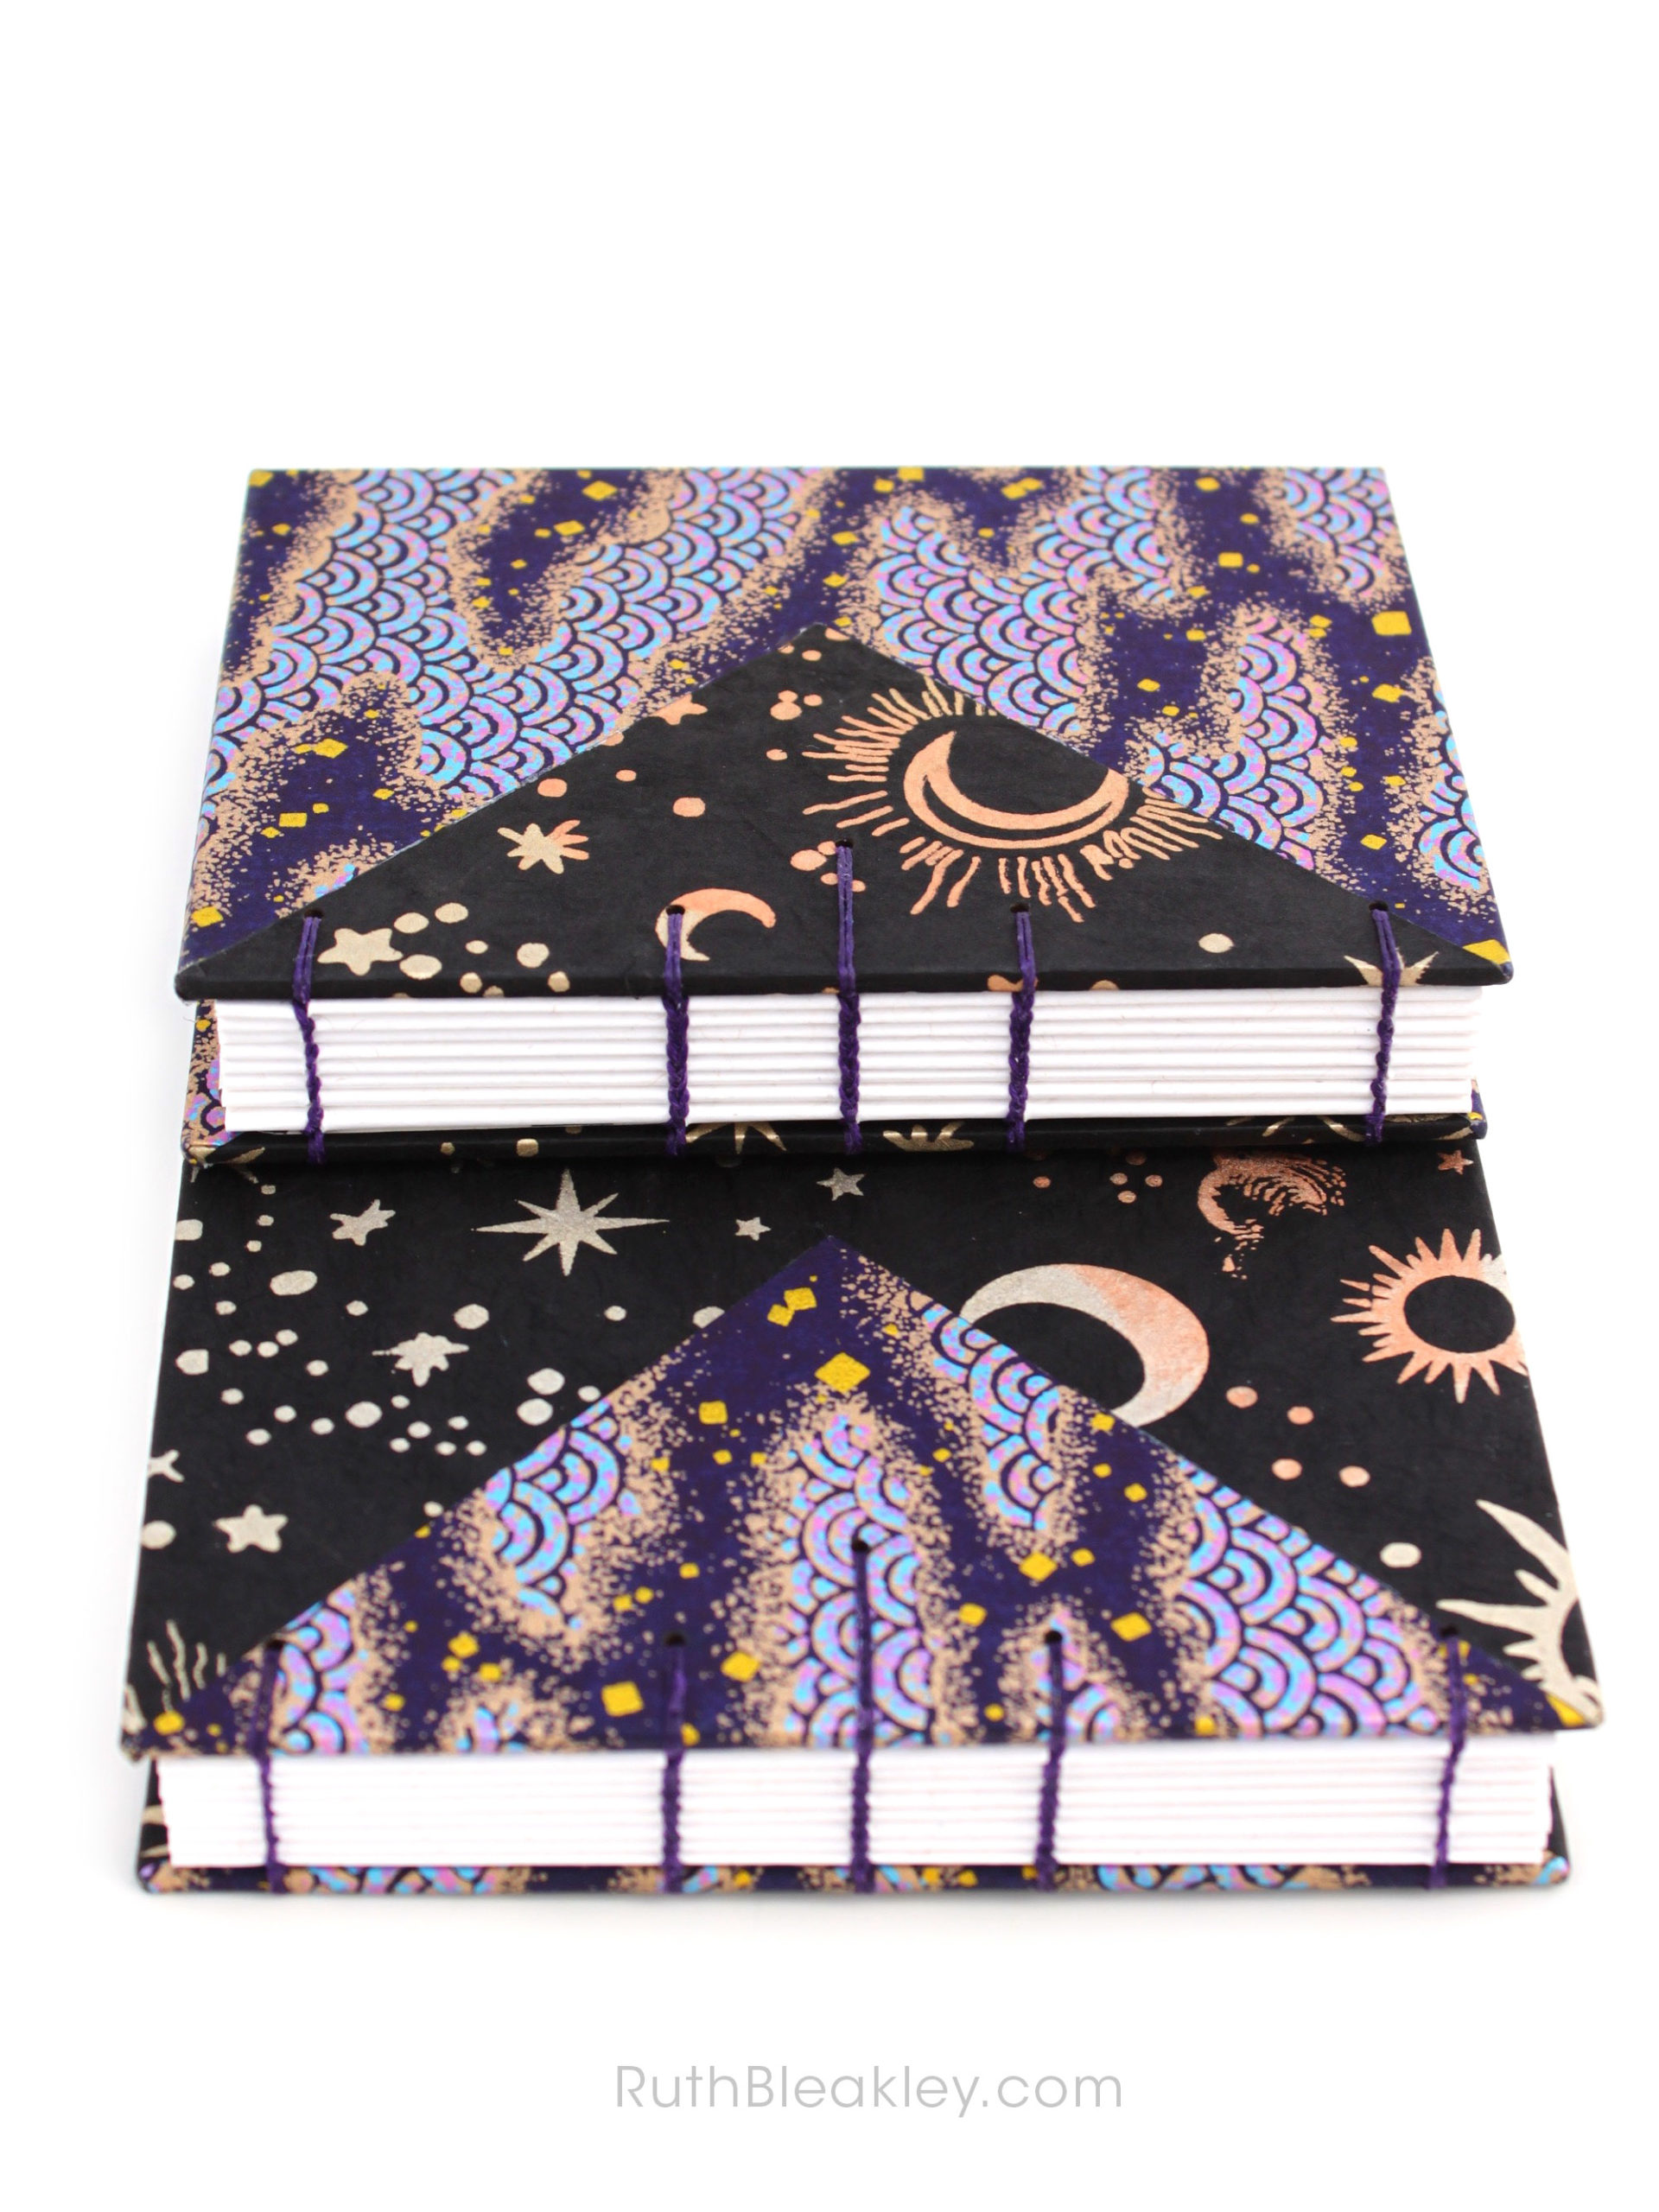 Two black and purple handmade journals by Ruth Bleakley with cosmic imagery